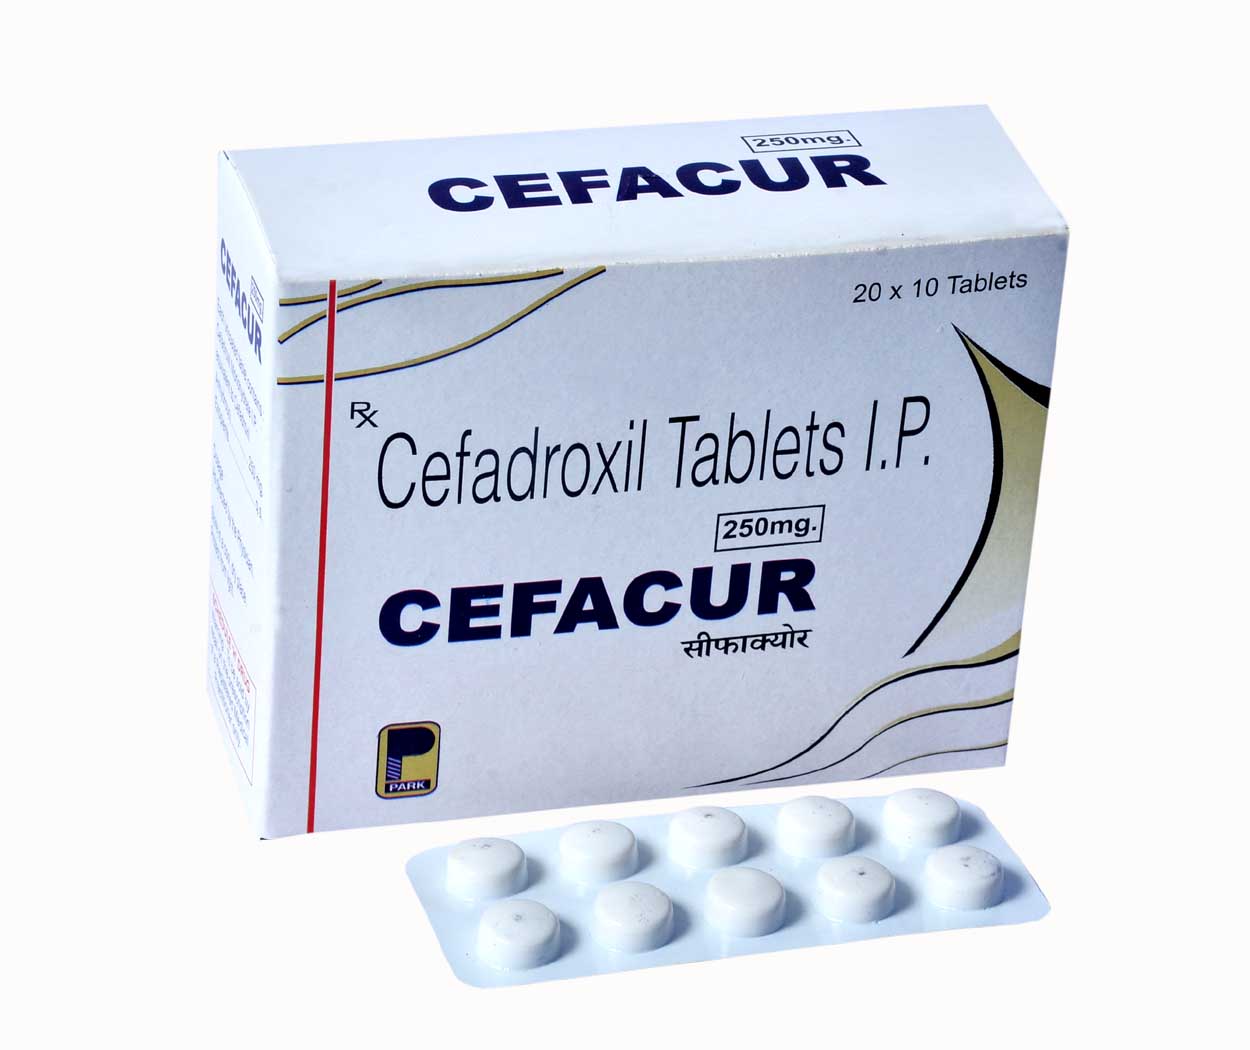 Product Name: CEFACUR 250mg, Compositions of CEFACUR 250mg are Cefadroxil Tablets I.P. - Park Pharmaceuticals